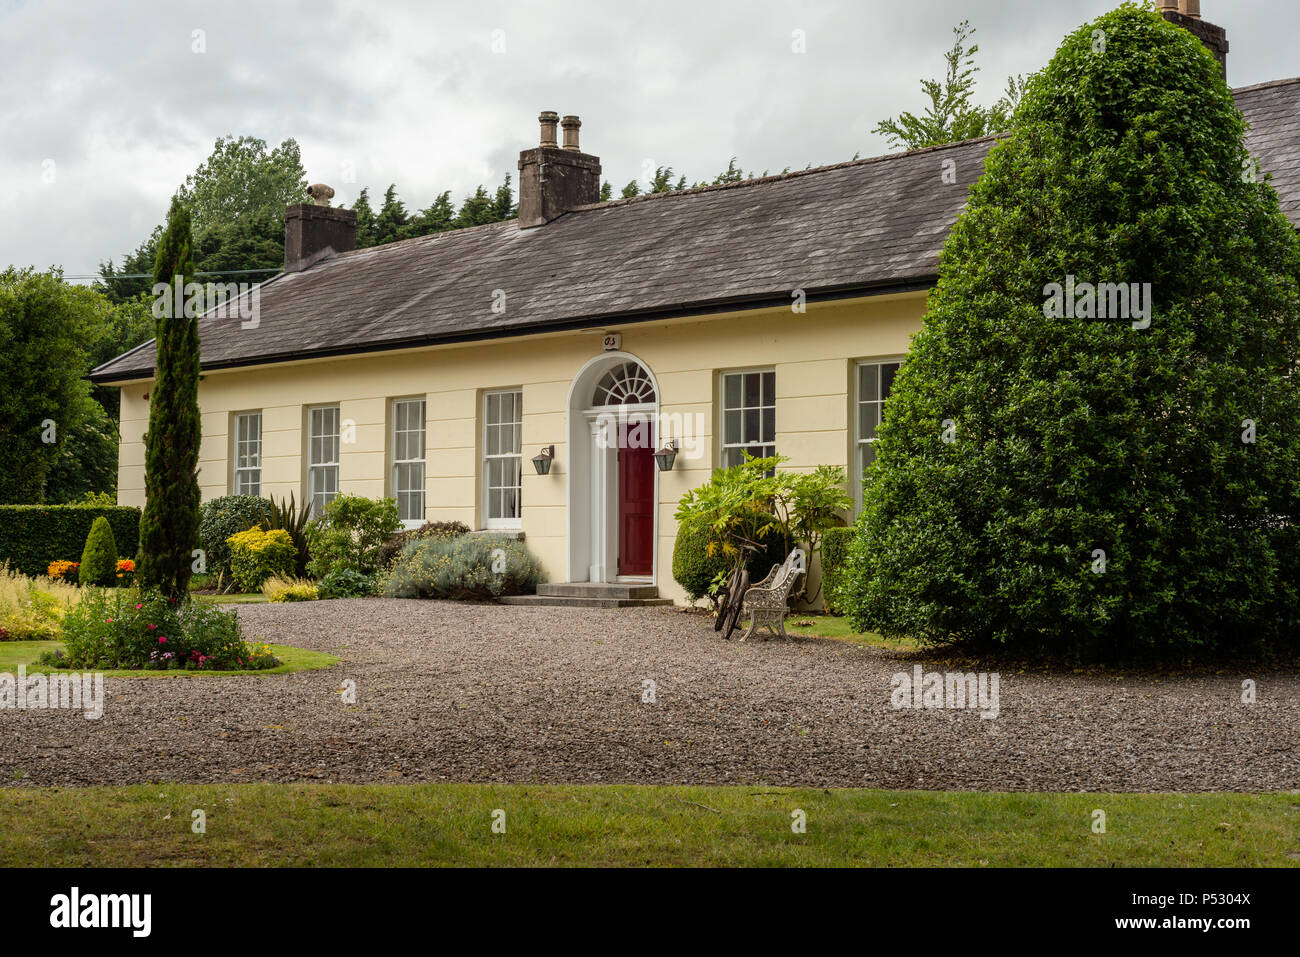 The Distiller's cottage is the home to the Irish Distillers company Archives at The Old Midleton Distillery in Midleton, County Cork, Ireland. Stock Photo